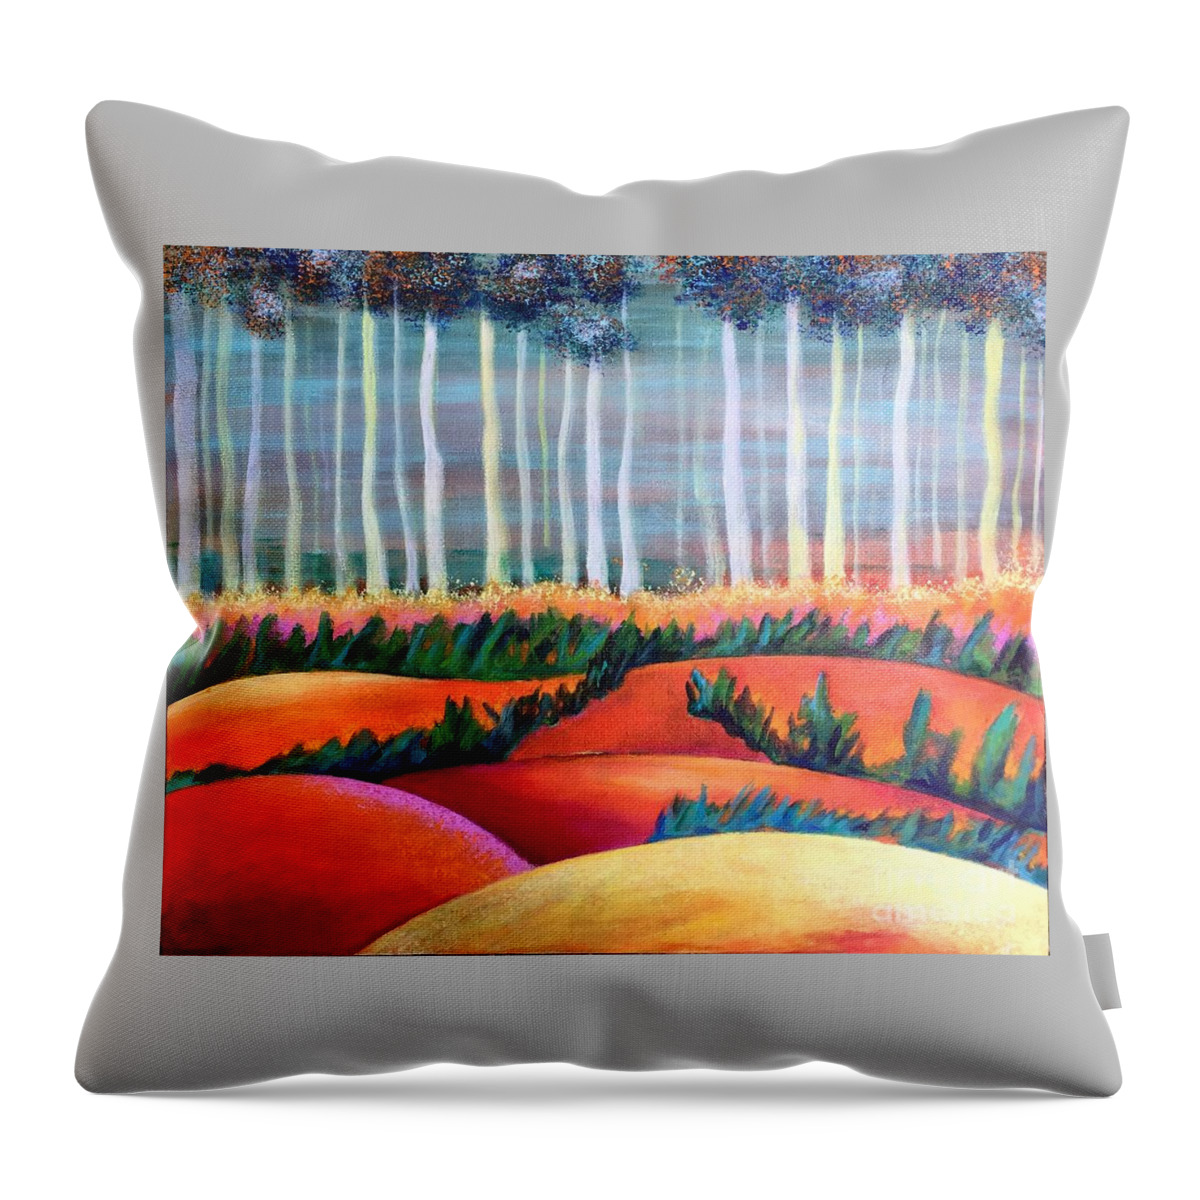 Landscape Throw Pillow featuring the painting Through the Mist by Elizabeth Fontaine-Barr